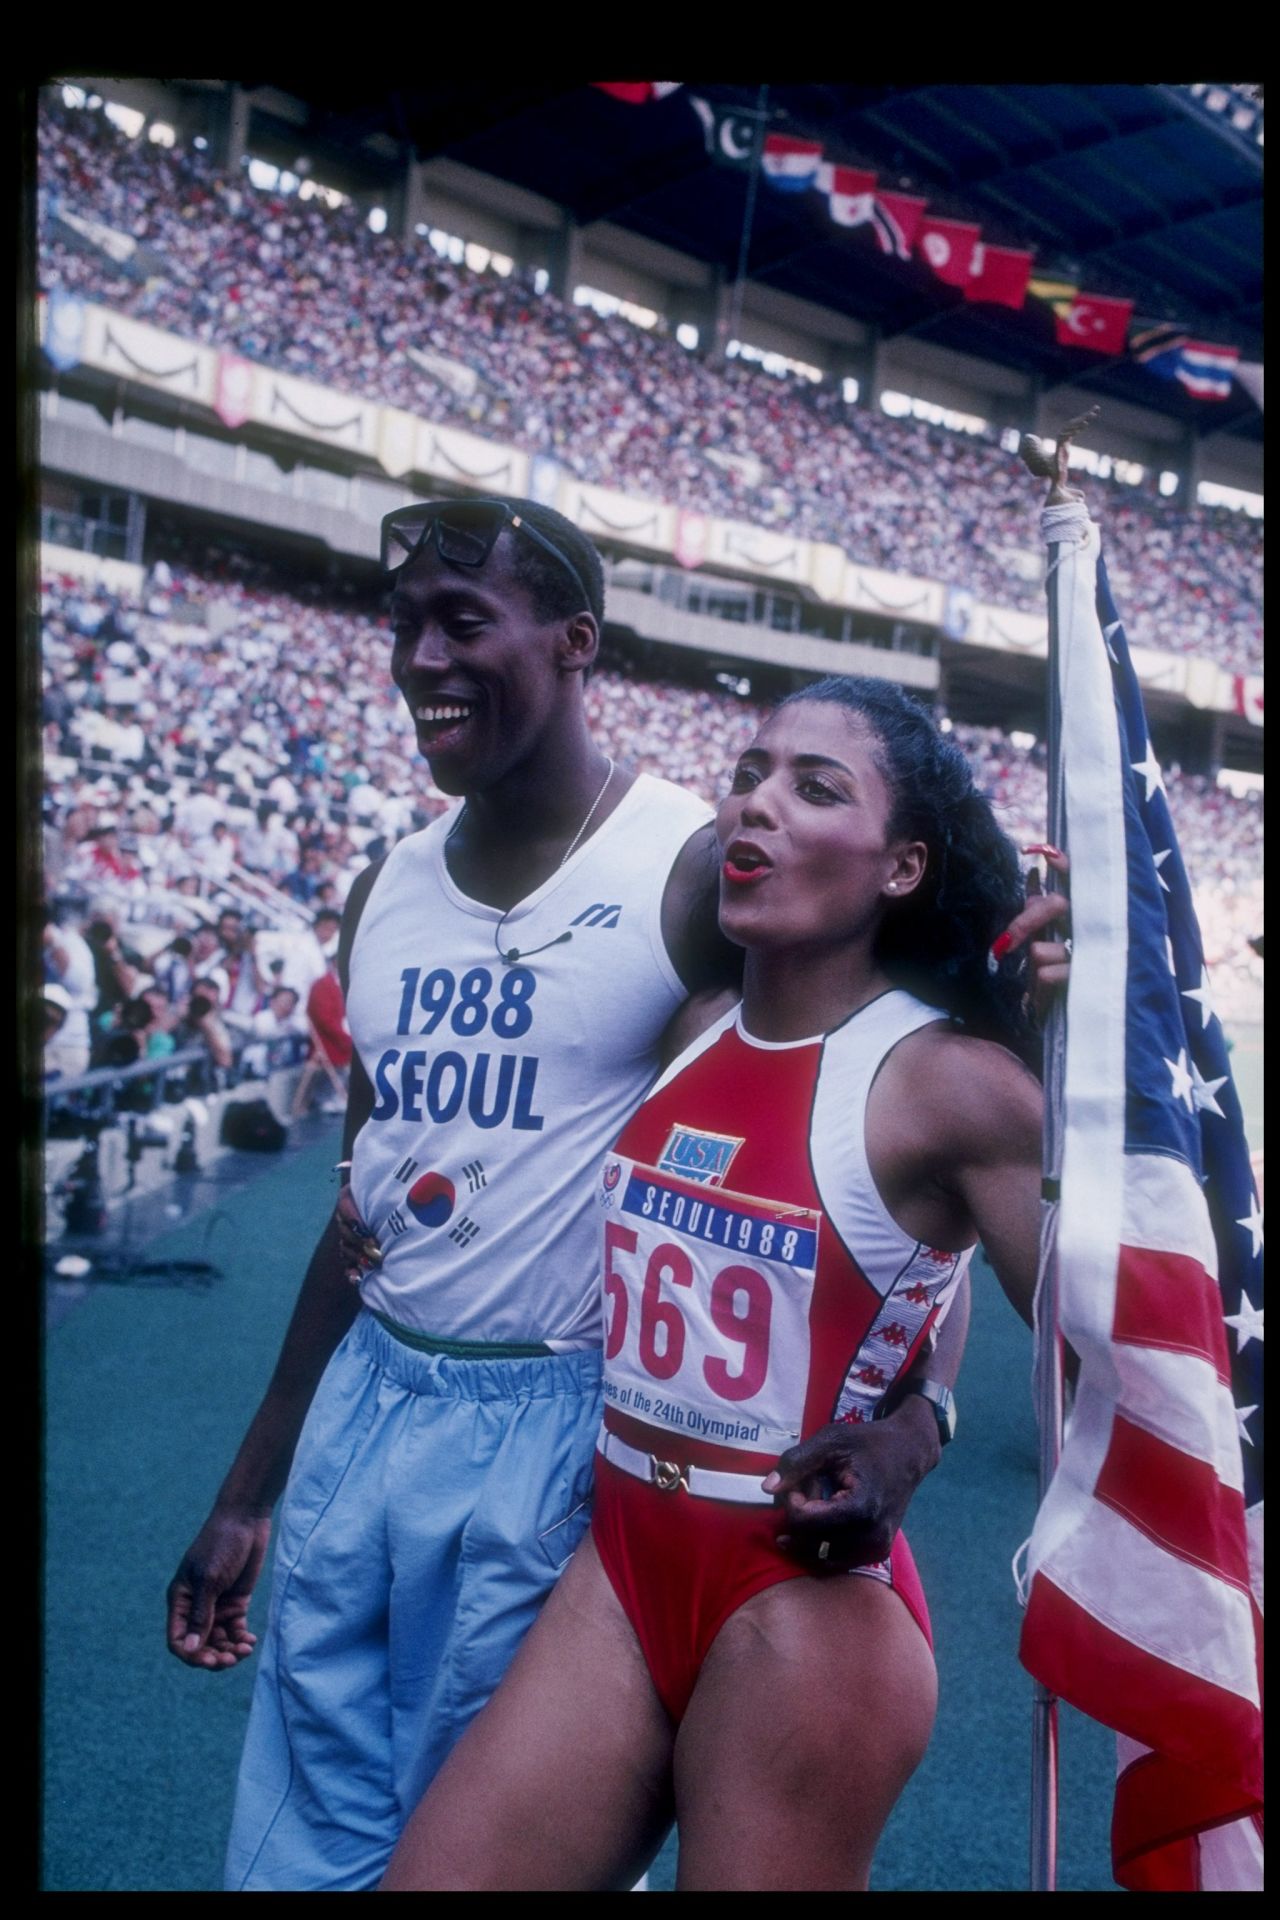 After winning her first gold, she went over to embrace her husband. She would later win the 200 meter final in a world record time. That record also still stands to this day.